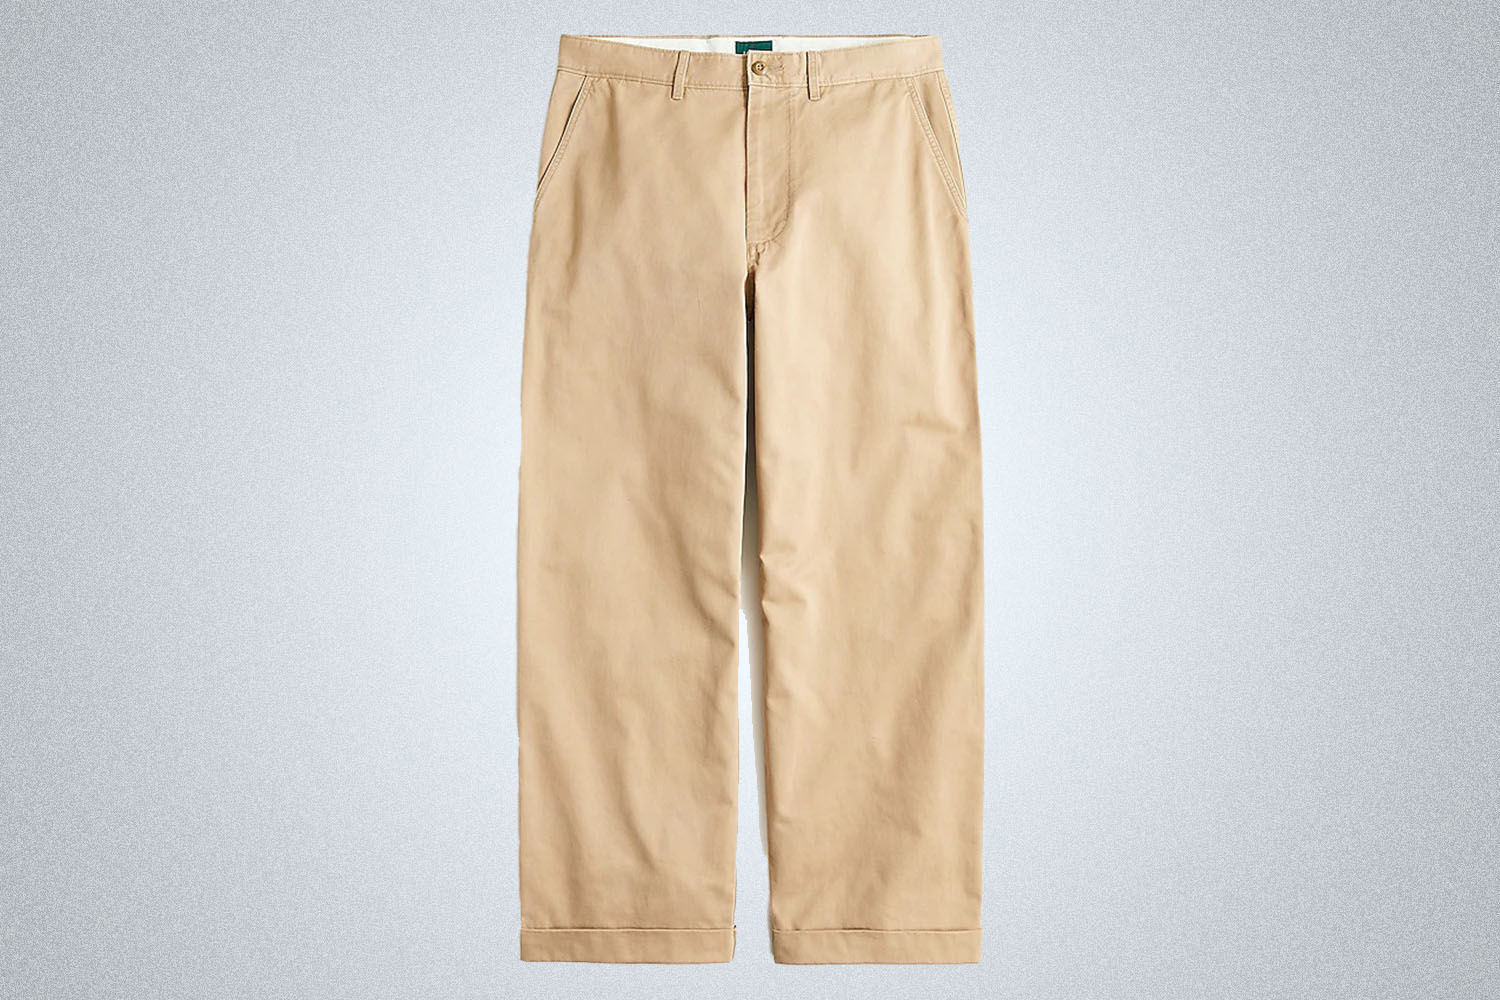 a pair of khaki "giant-fit" chinos  from J.Crew on a grey background 